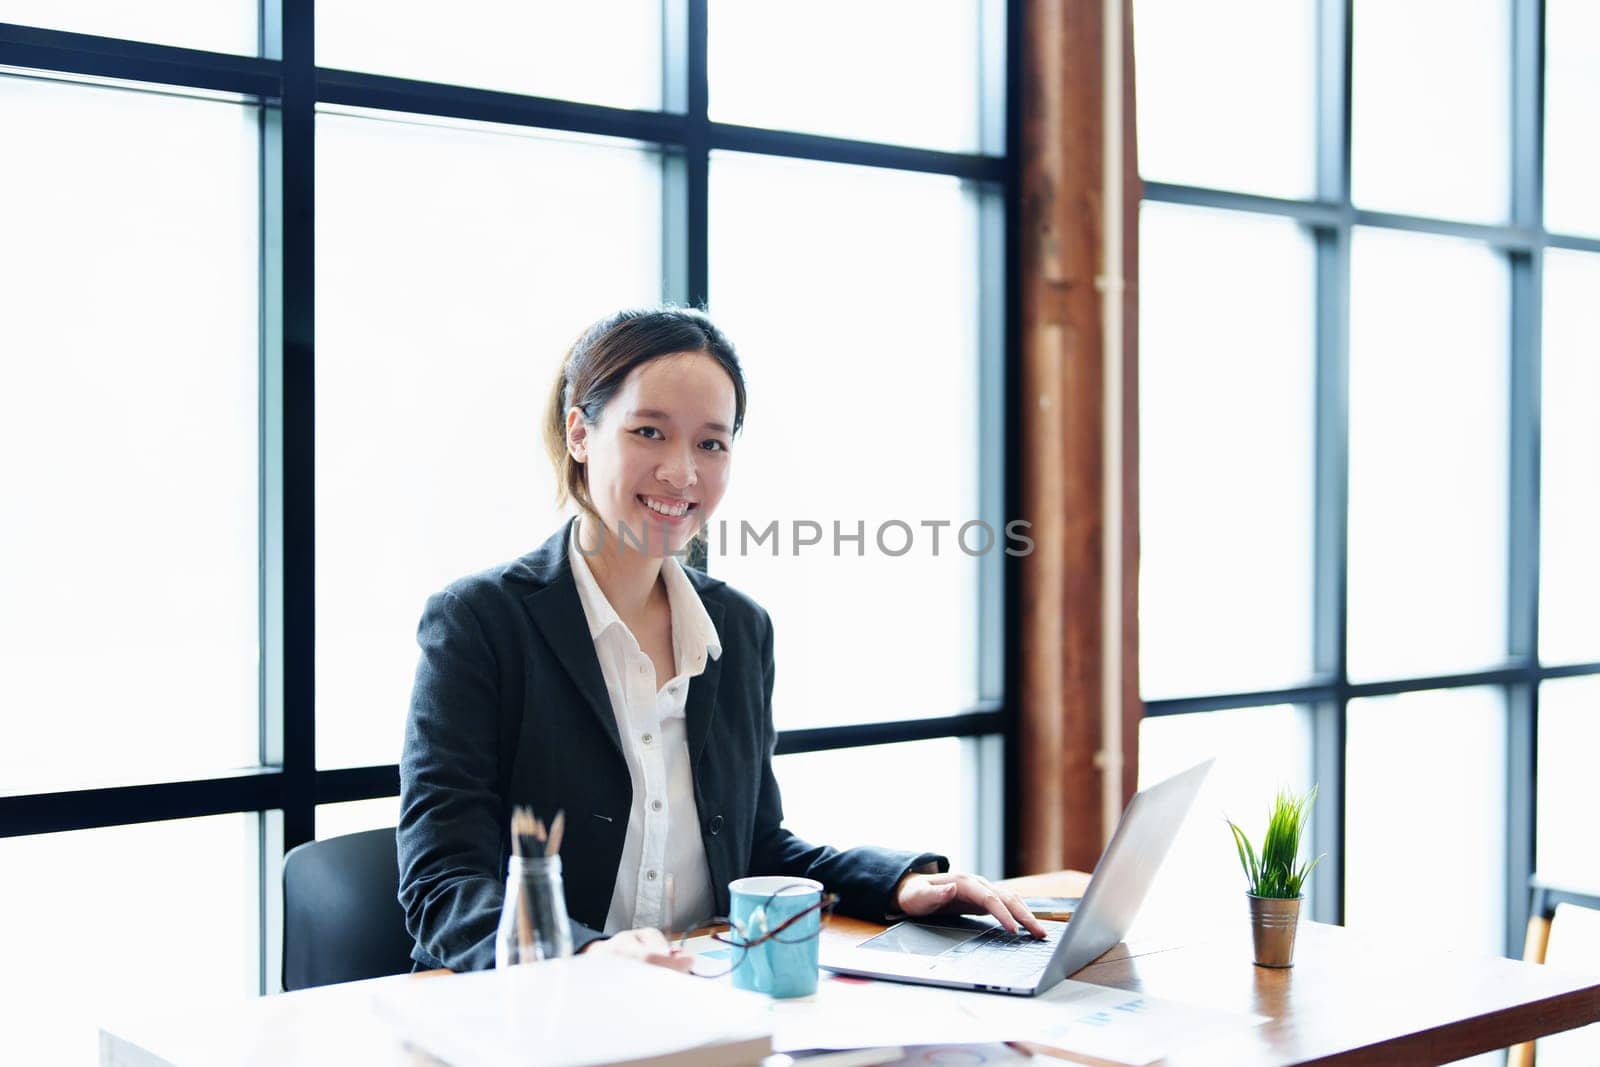 Portrait of a young Asian woman showing a smiling face using a computer and financial statements.